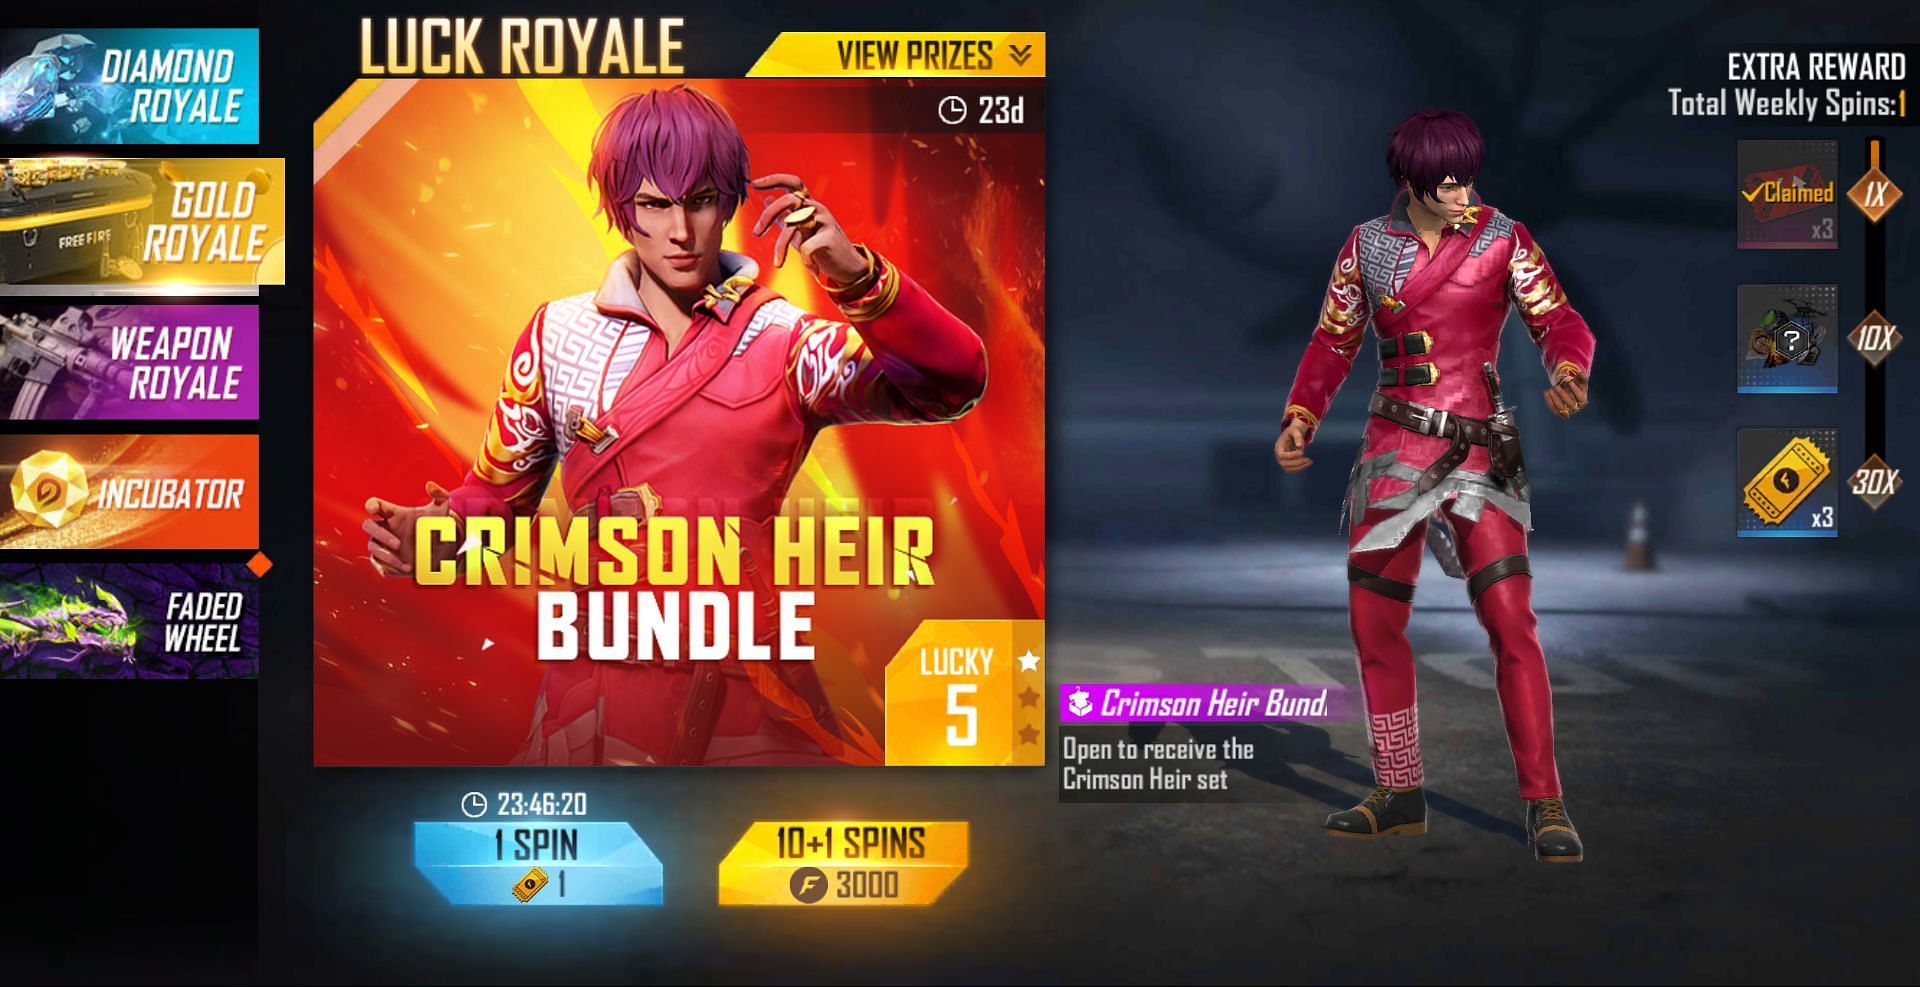 Gold Royale ends on the same day as the Clash Squad season in the game (Image via Free Fire)